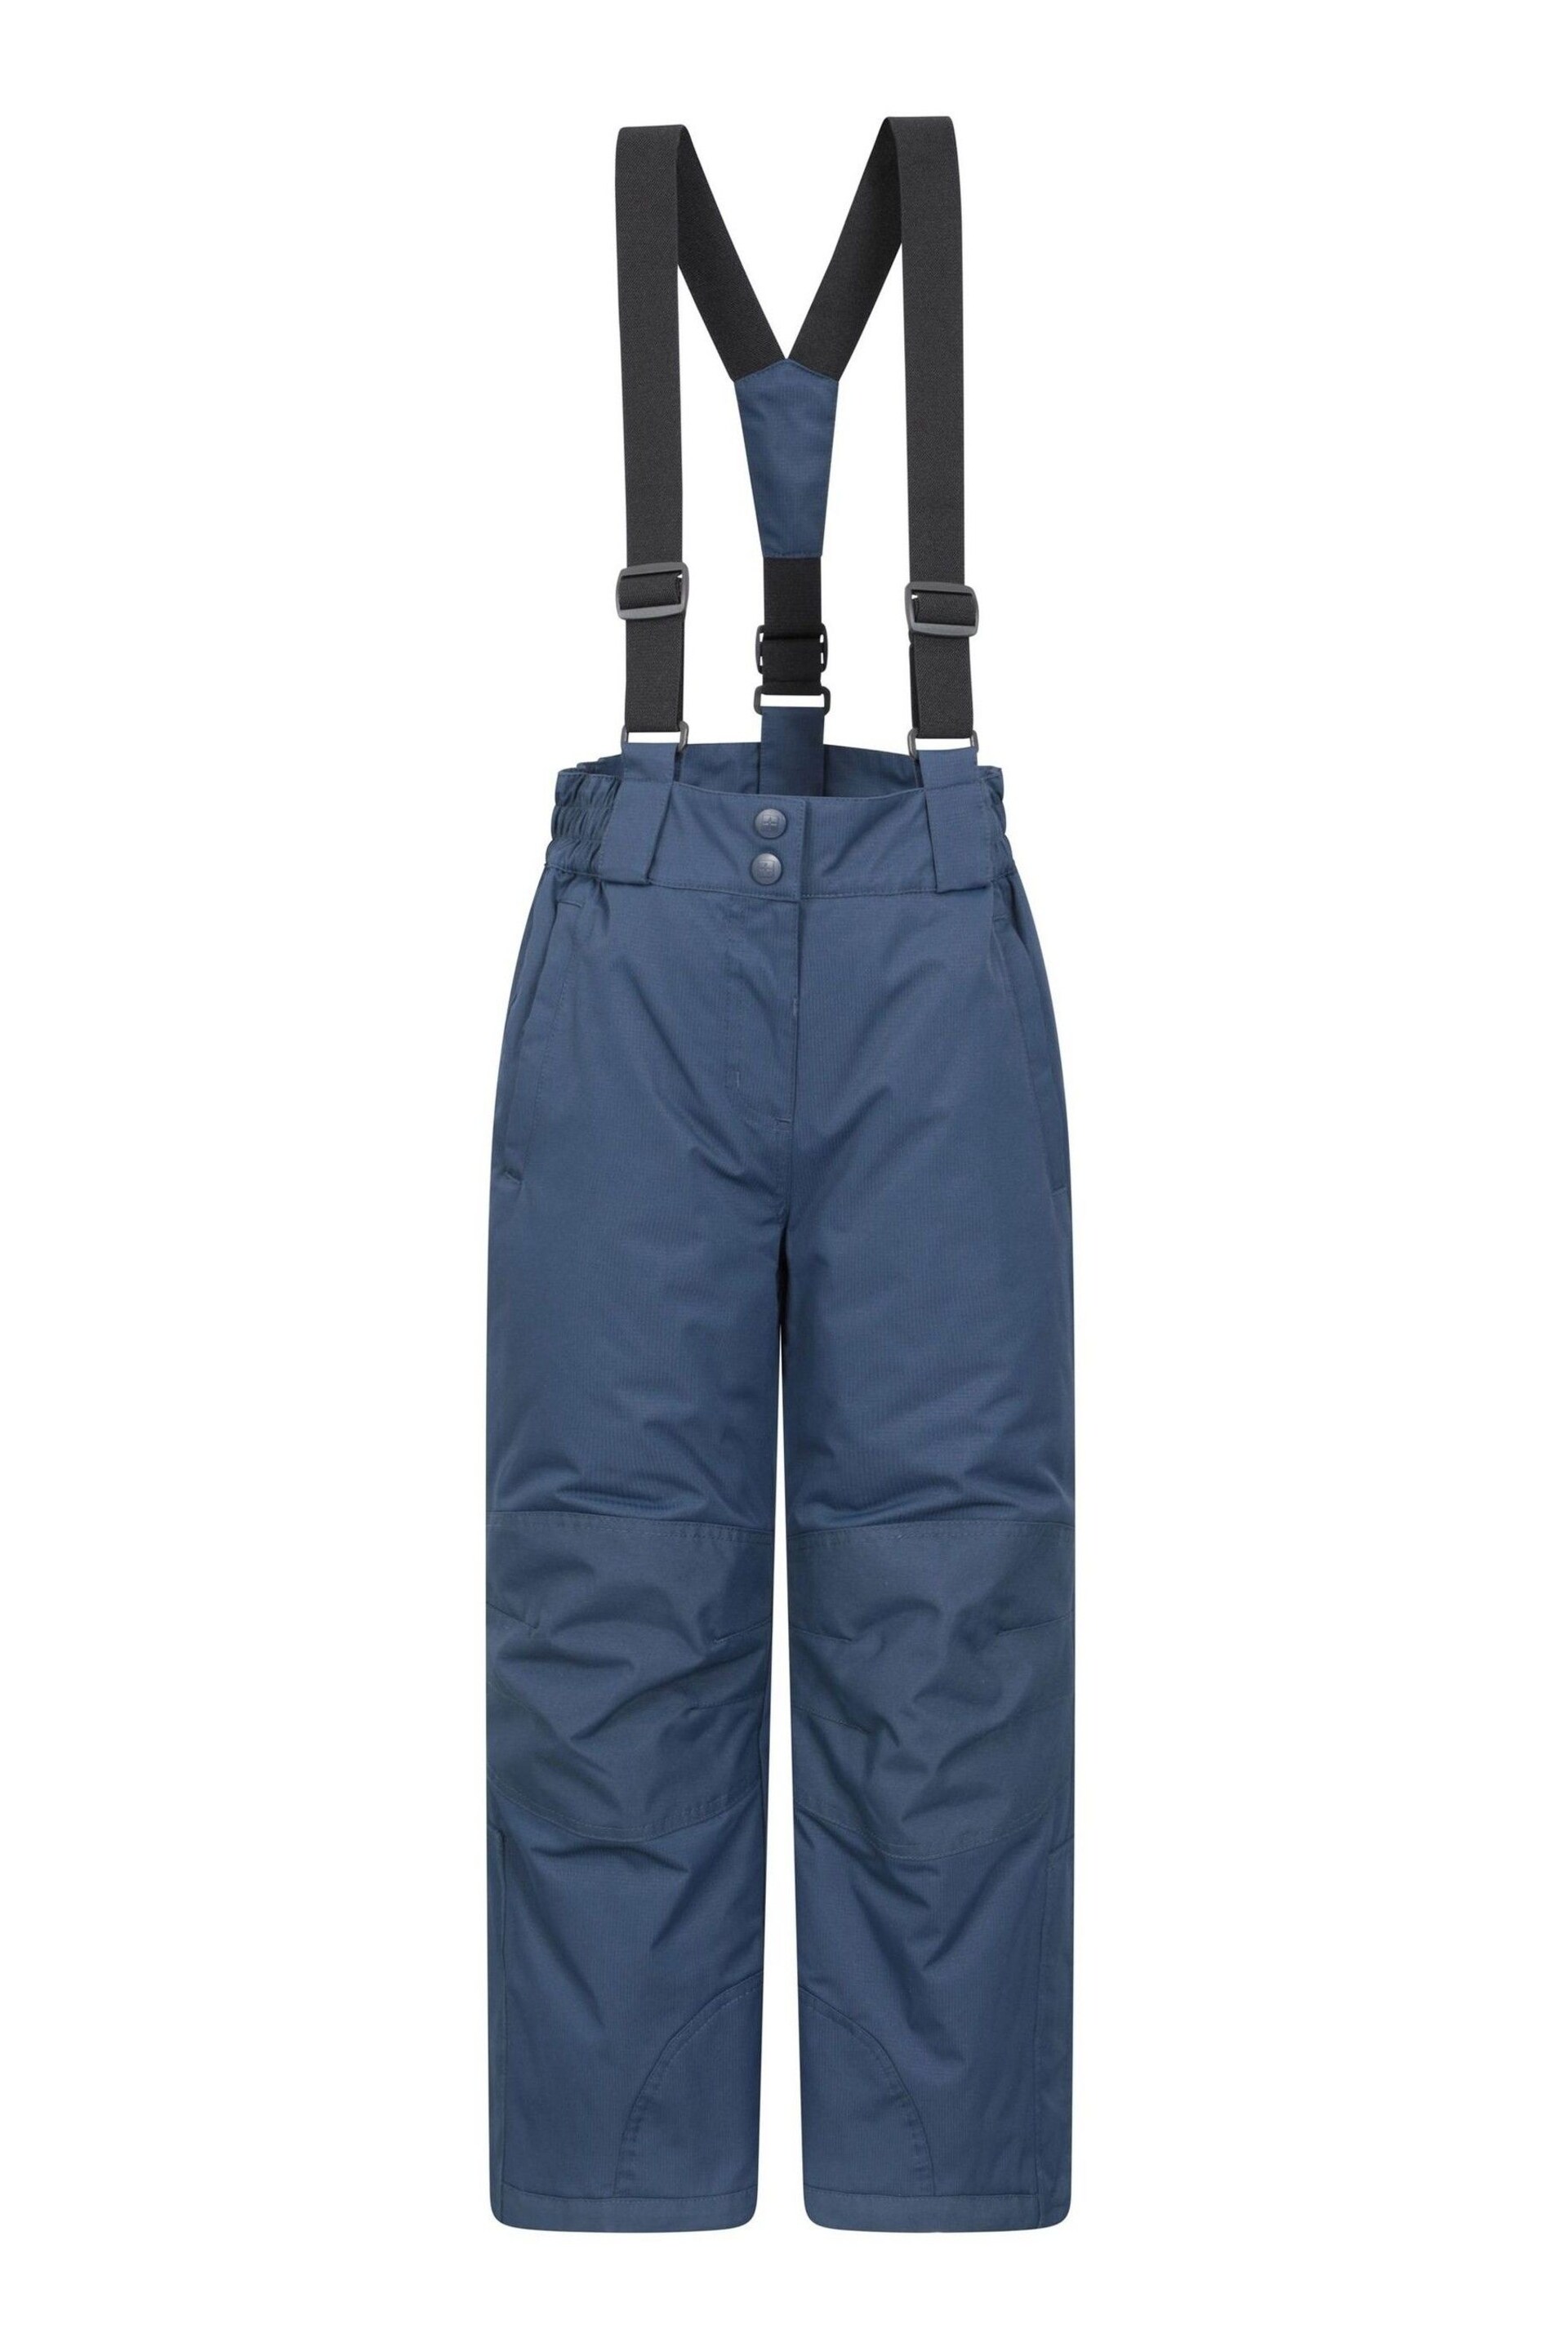 Mountain Warehouse Blue Raptor Kids Snow Trousers - Image 1 of 5